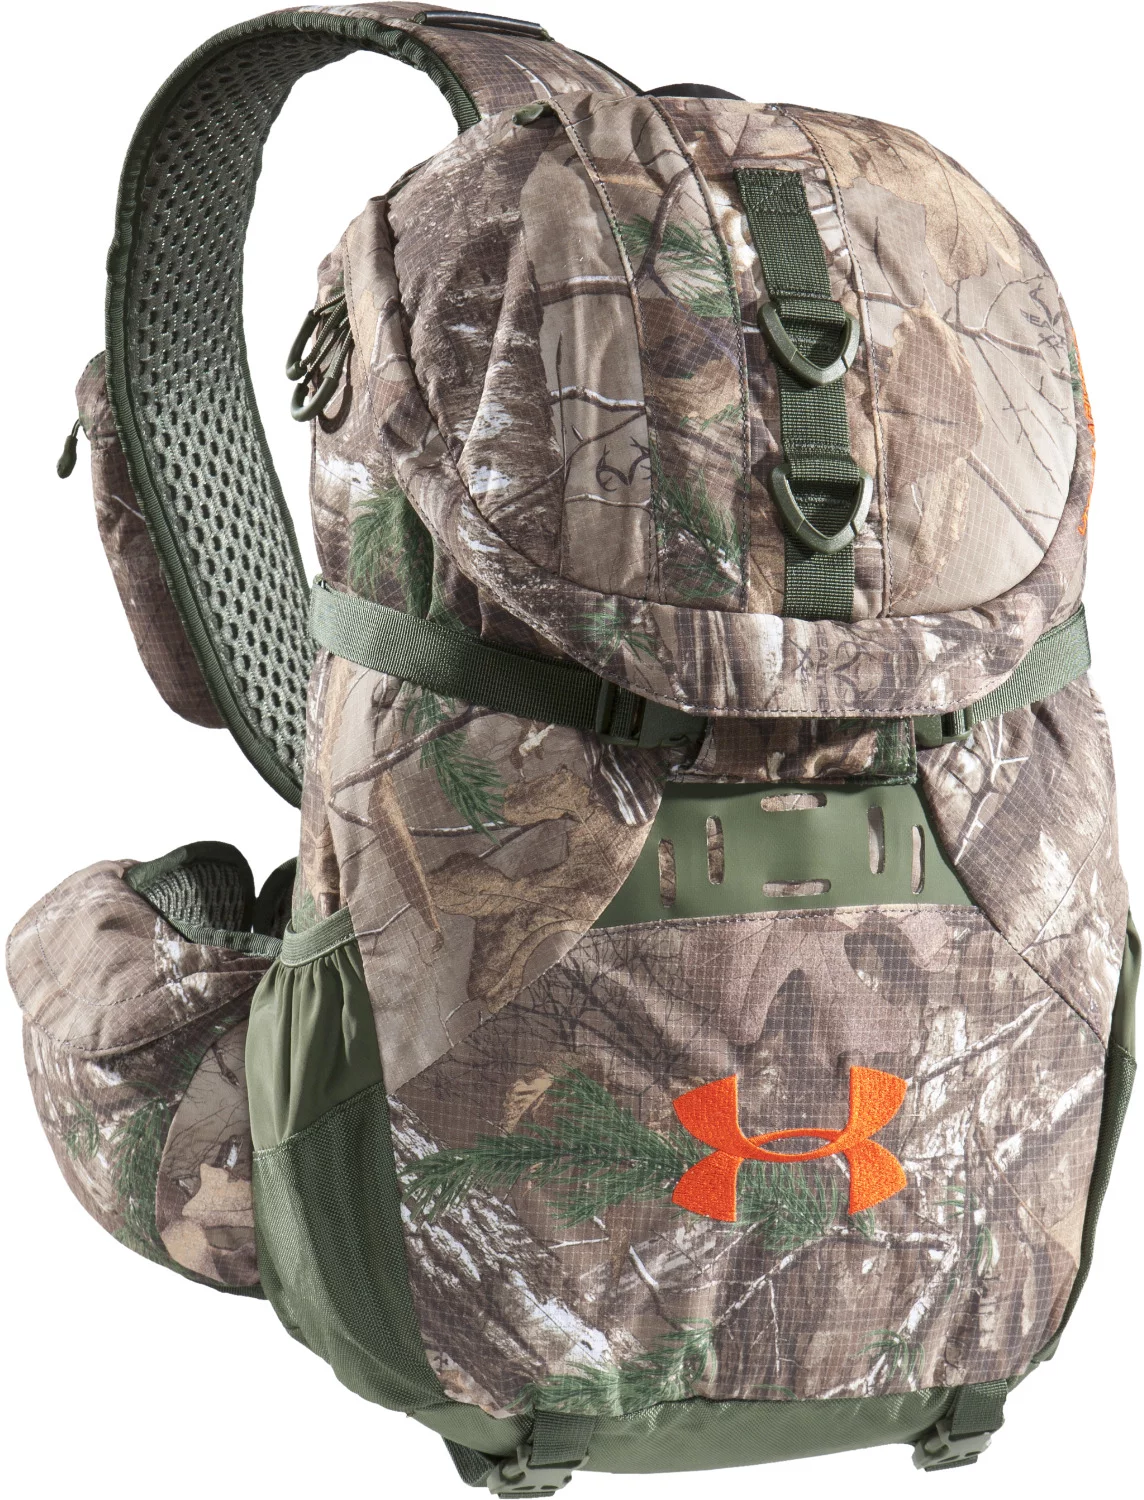 Under Armour Backpacks Sling . Under Armour Sling Bag . Now!check ...